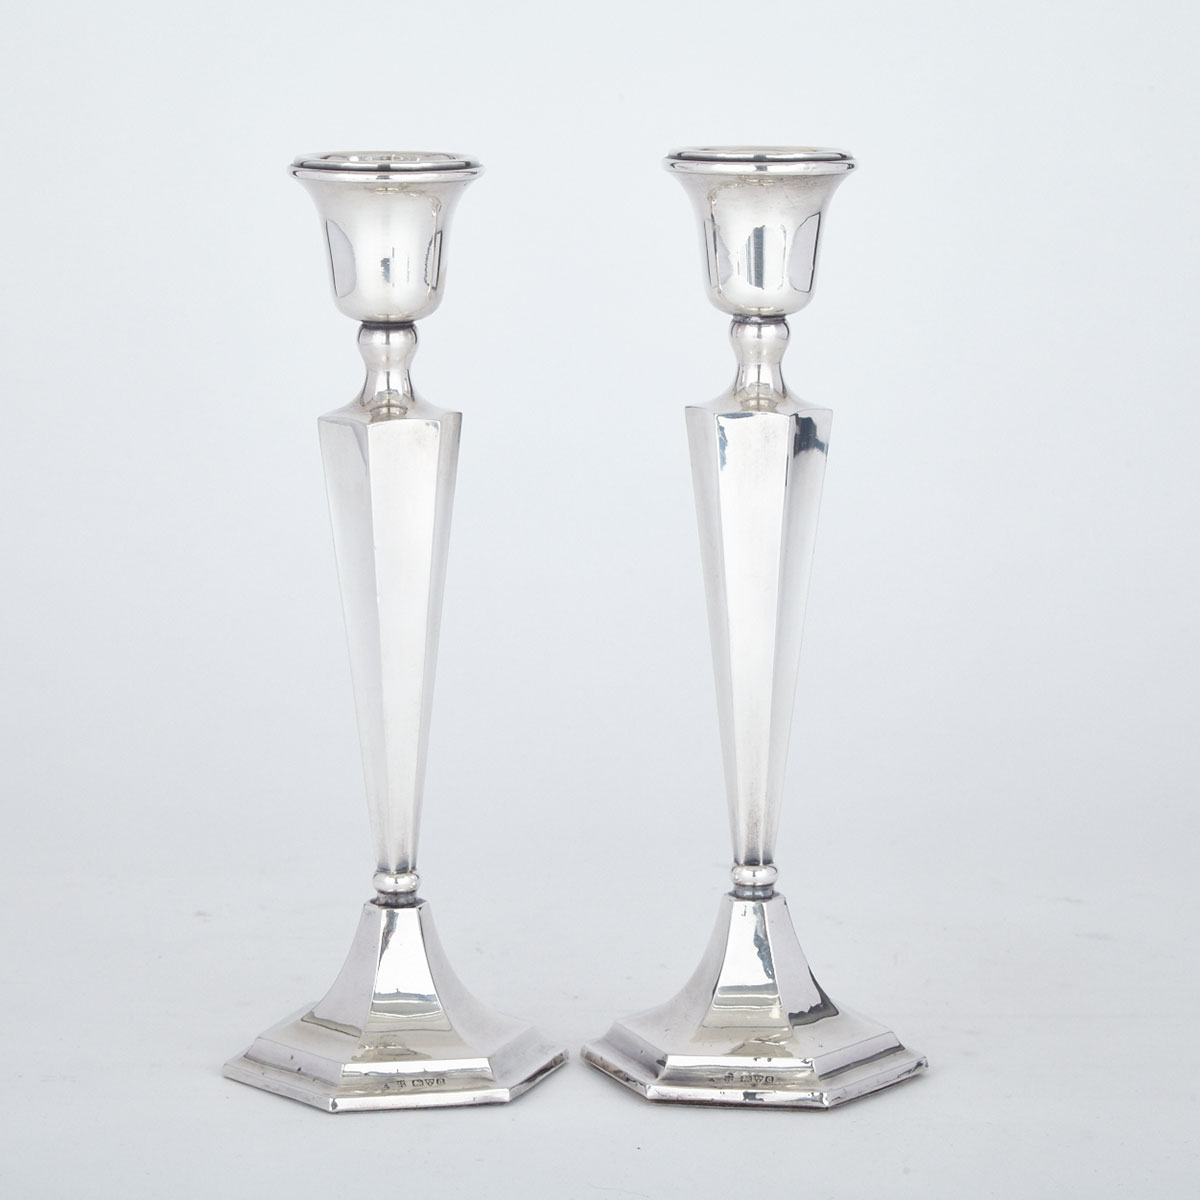 Pair of English Silver Candlesticks, James Deakin & Sons, Chester, 1926